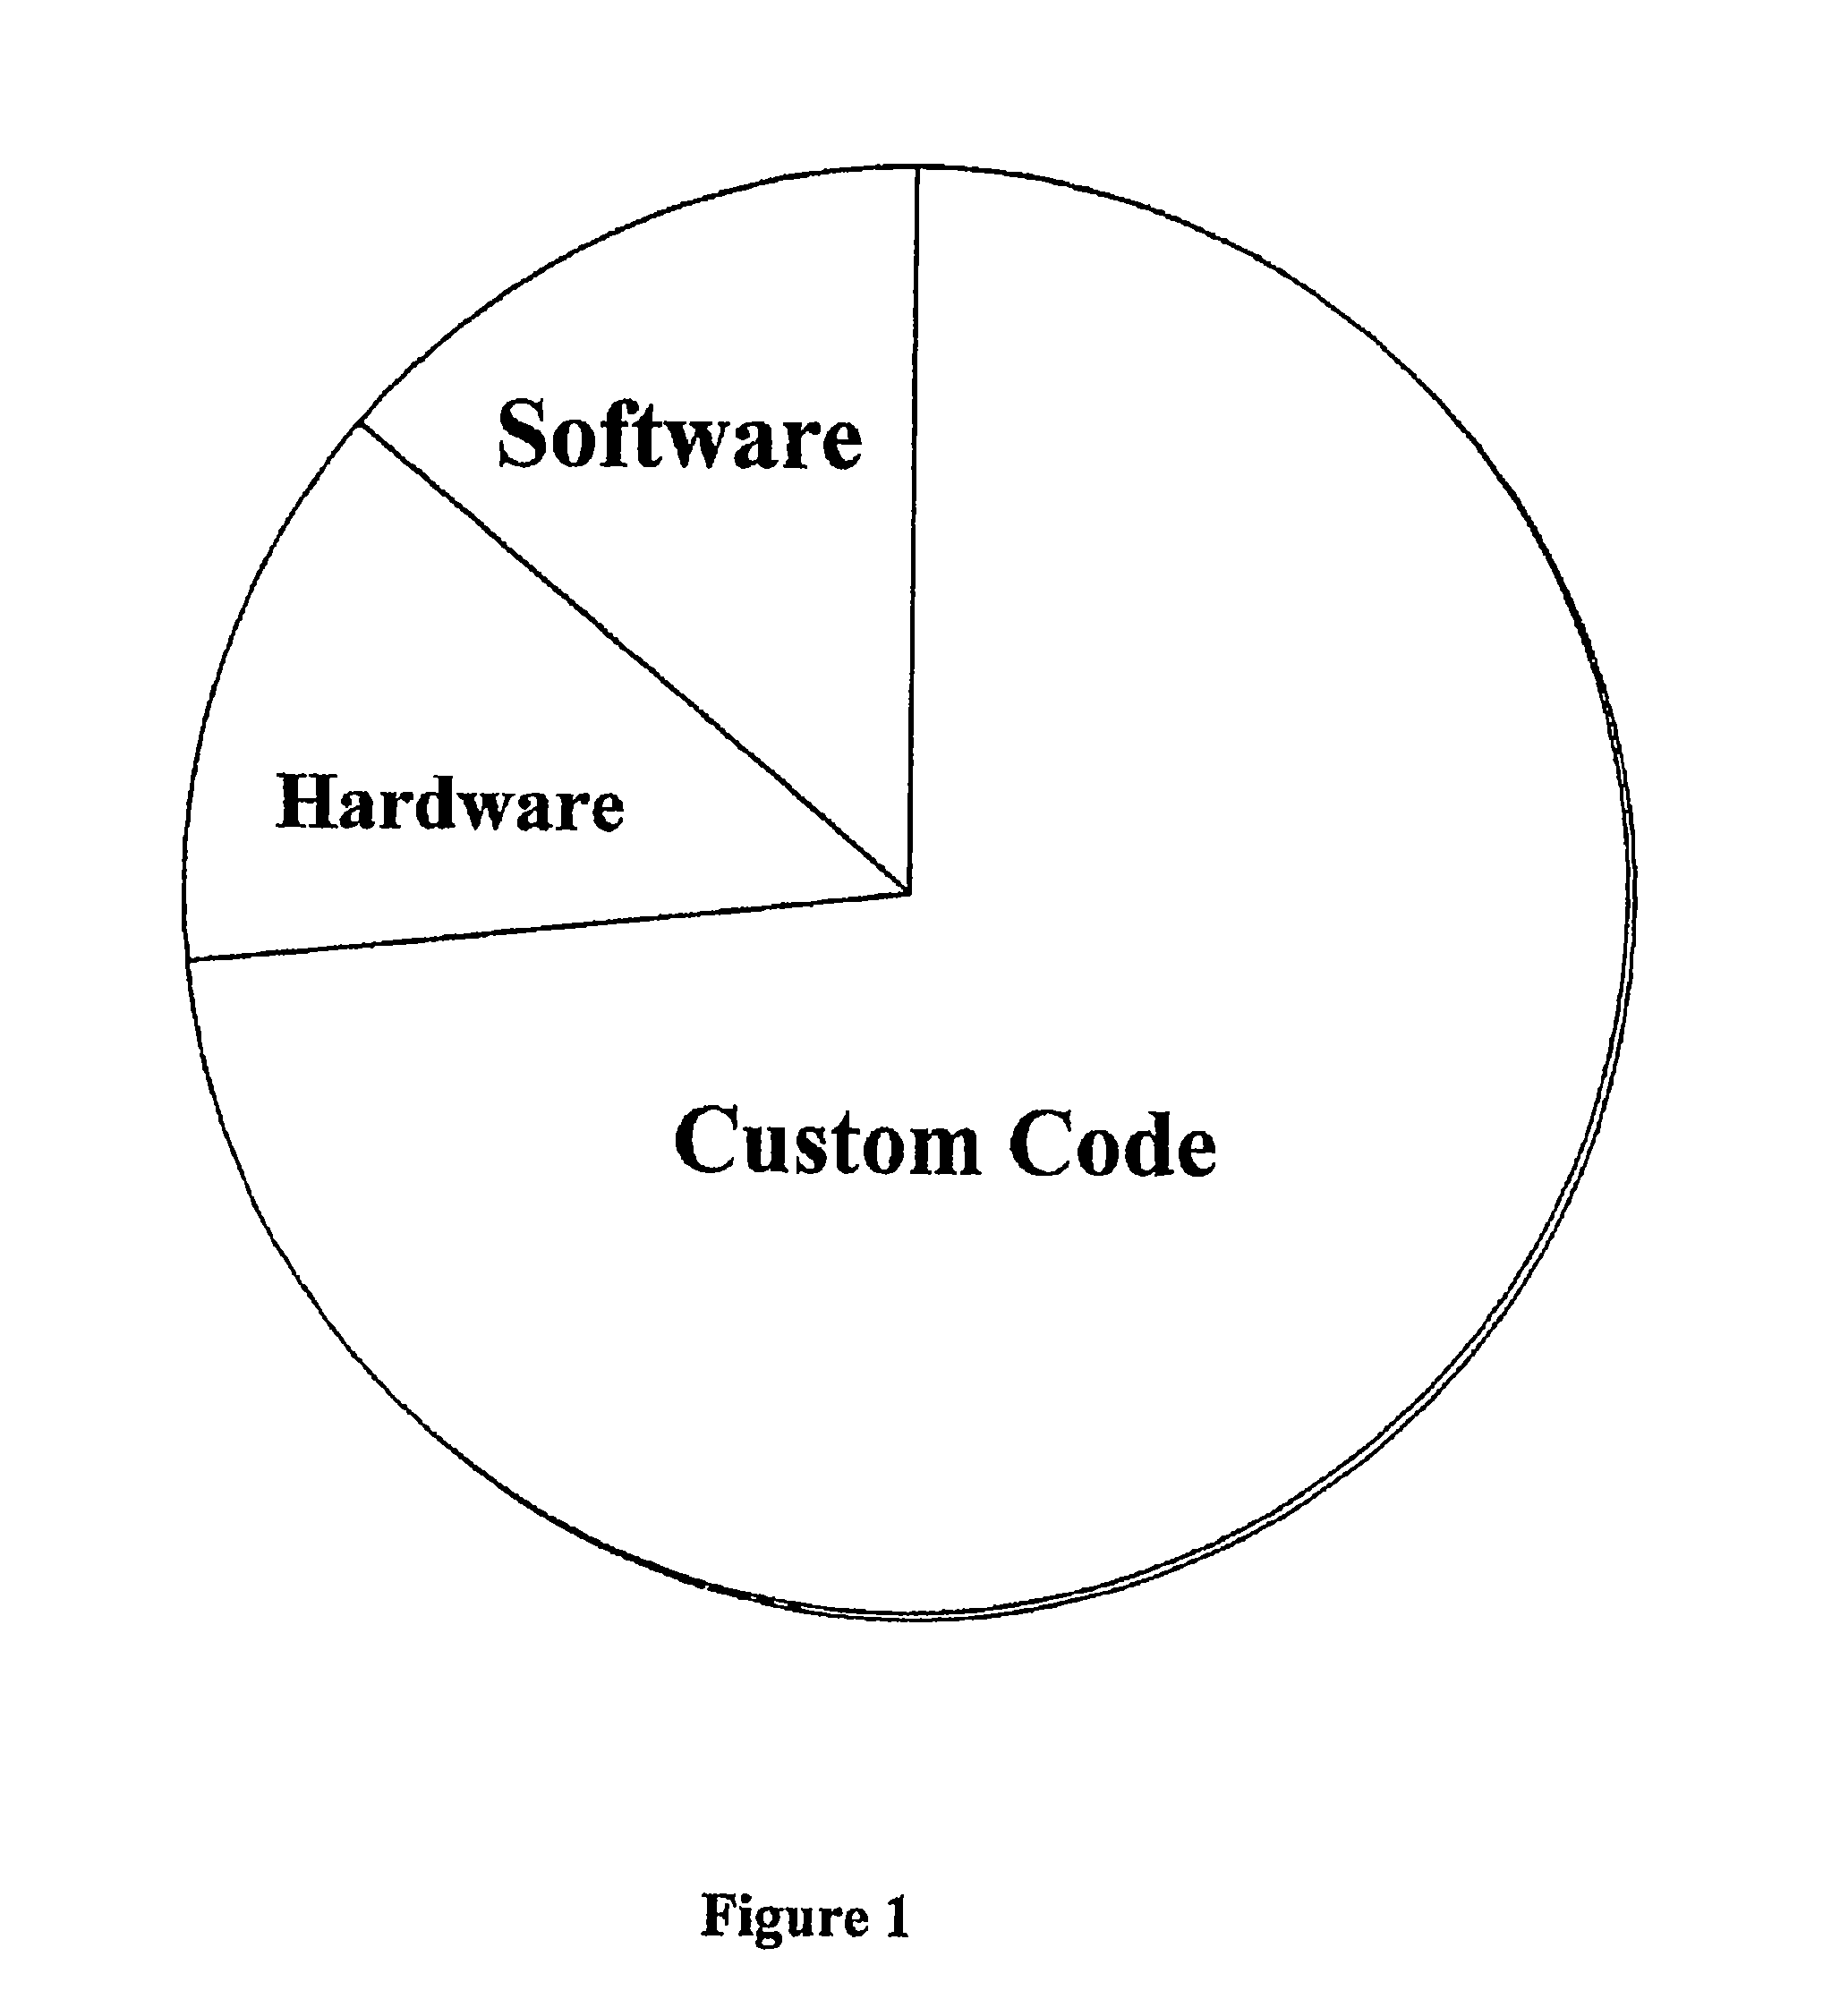 Method and system for providing an event auditing client server software arrangement